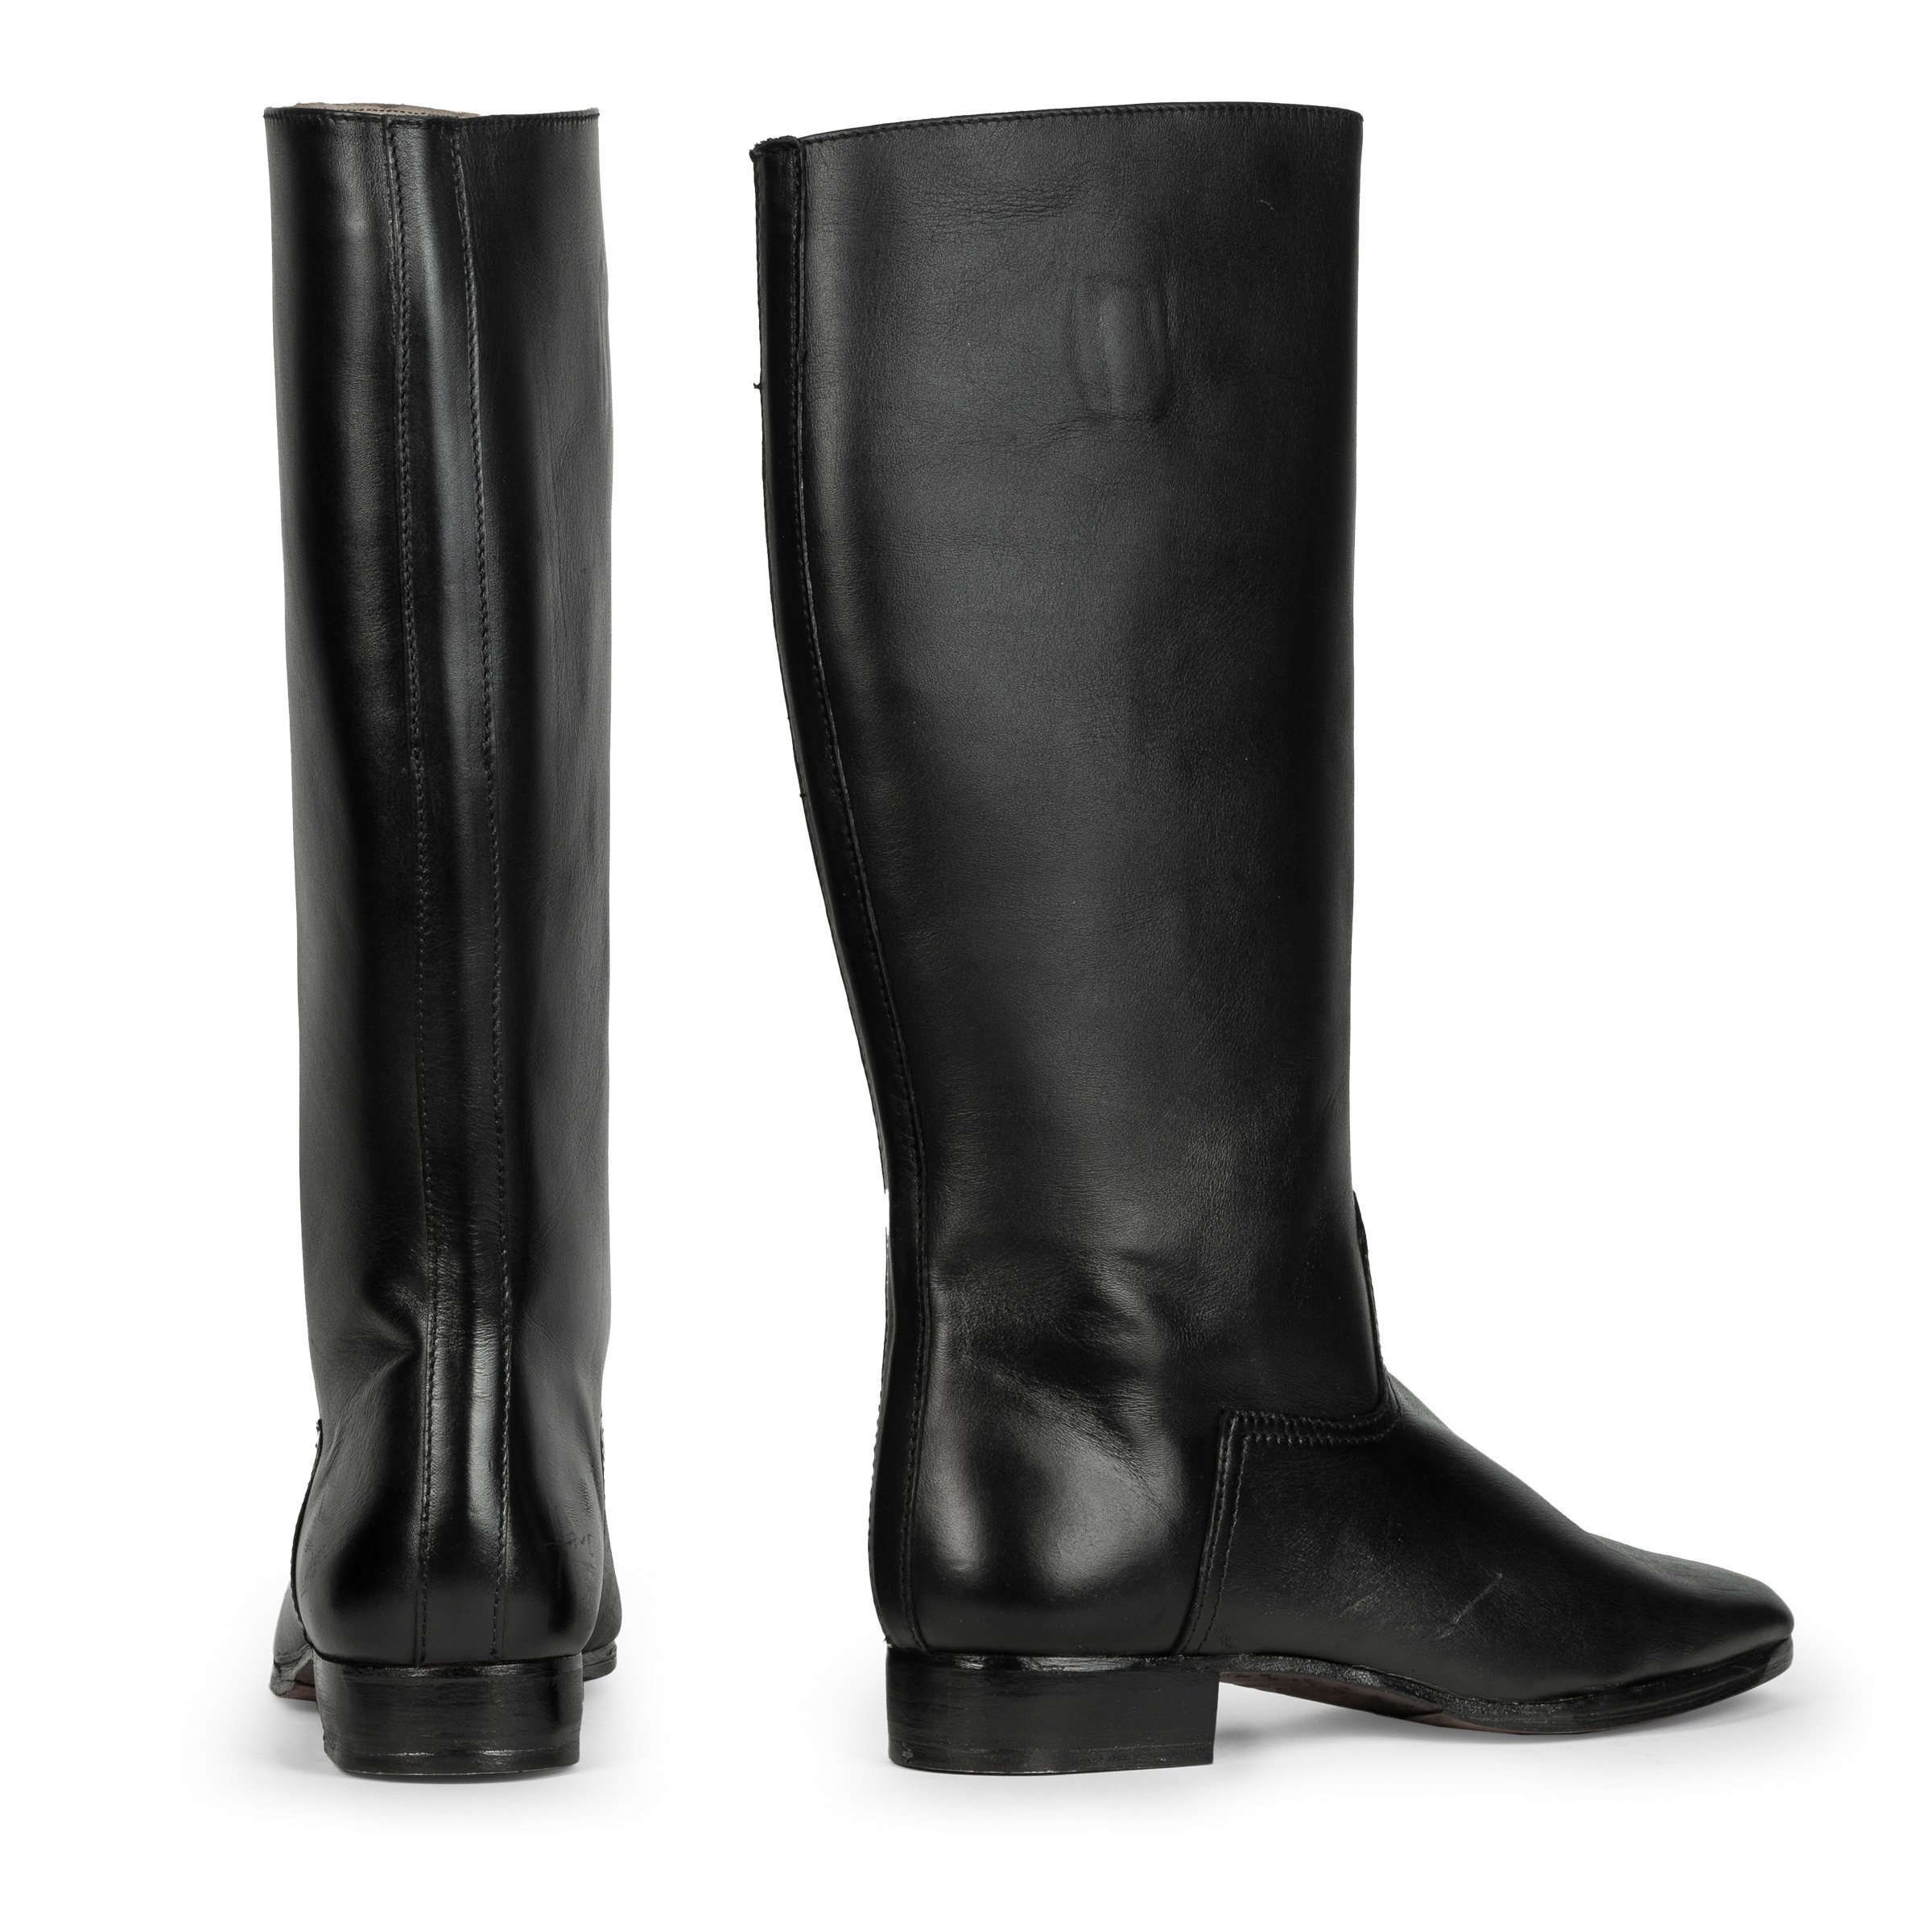 WH/SS/LW Offiziersstiefel - leather officer boots - repro 46 262,25 ...